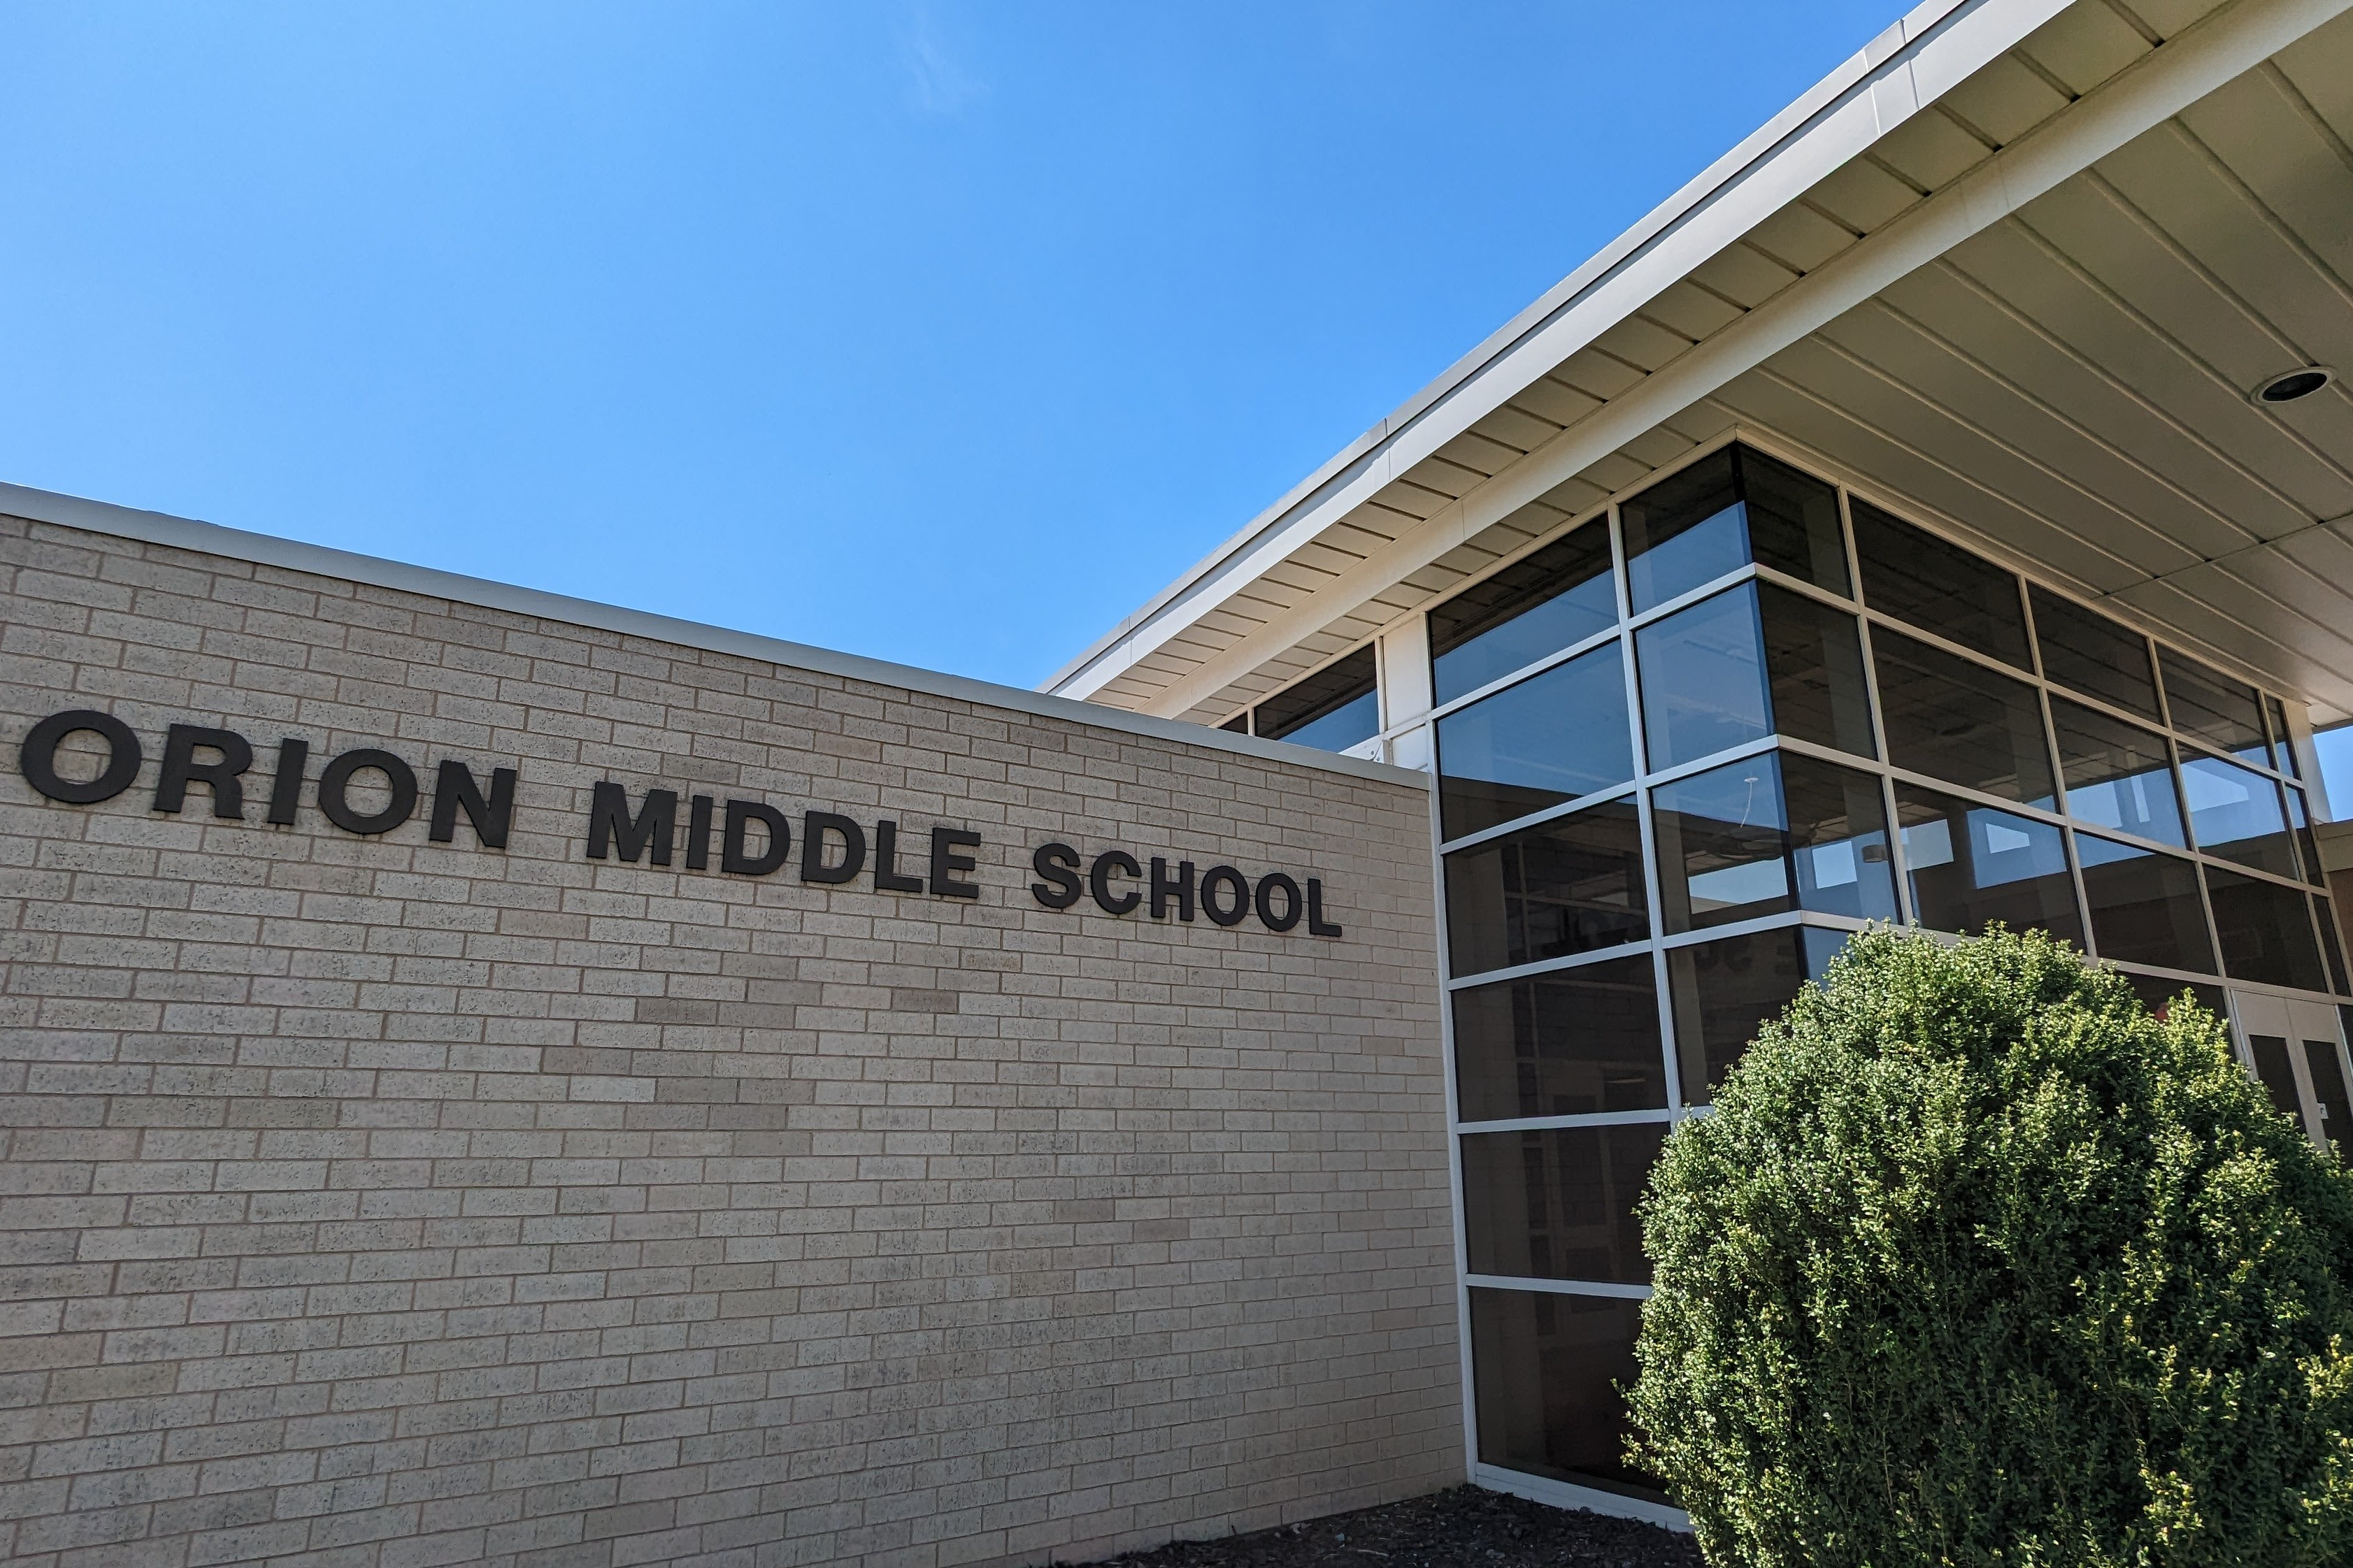 Orion Middle School building